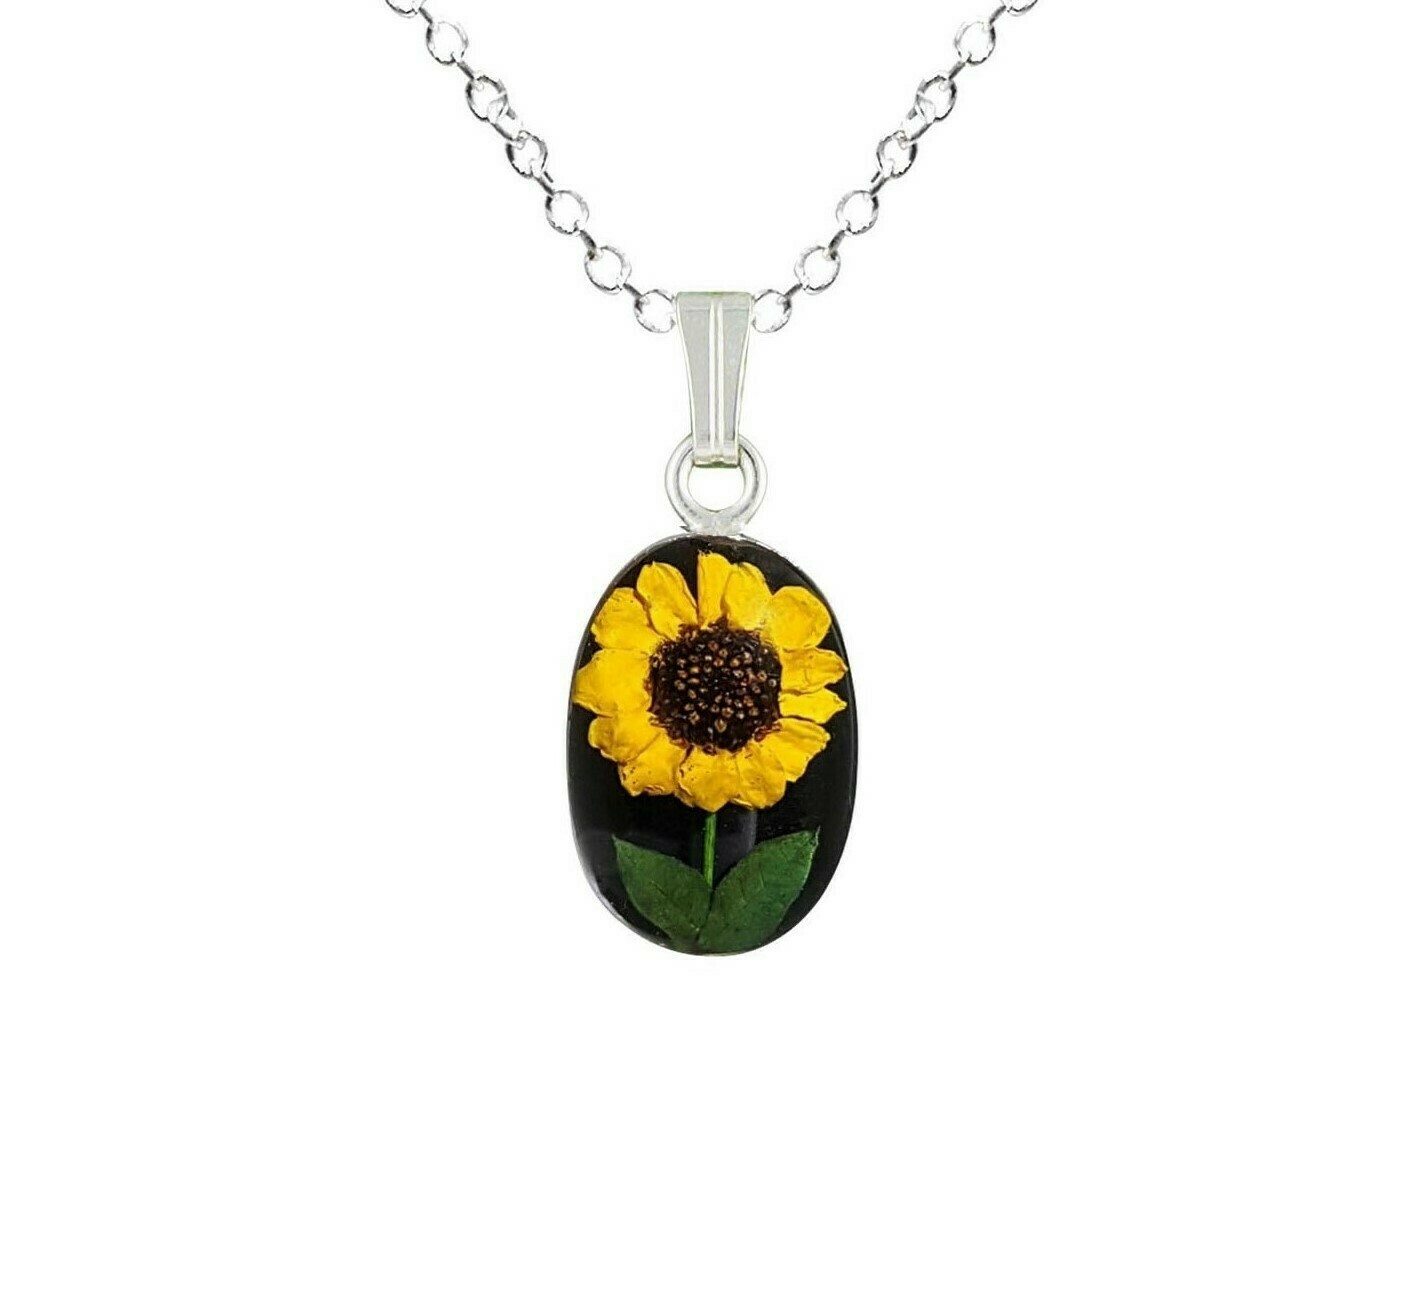 Sunflower Necklace, Small Oval, Black Background